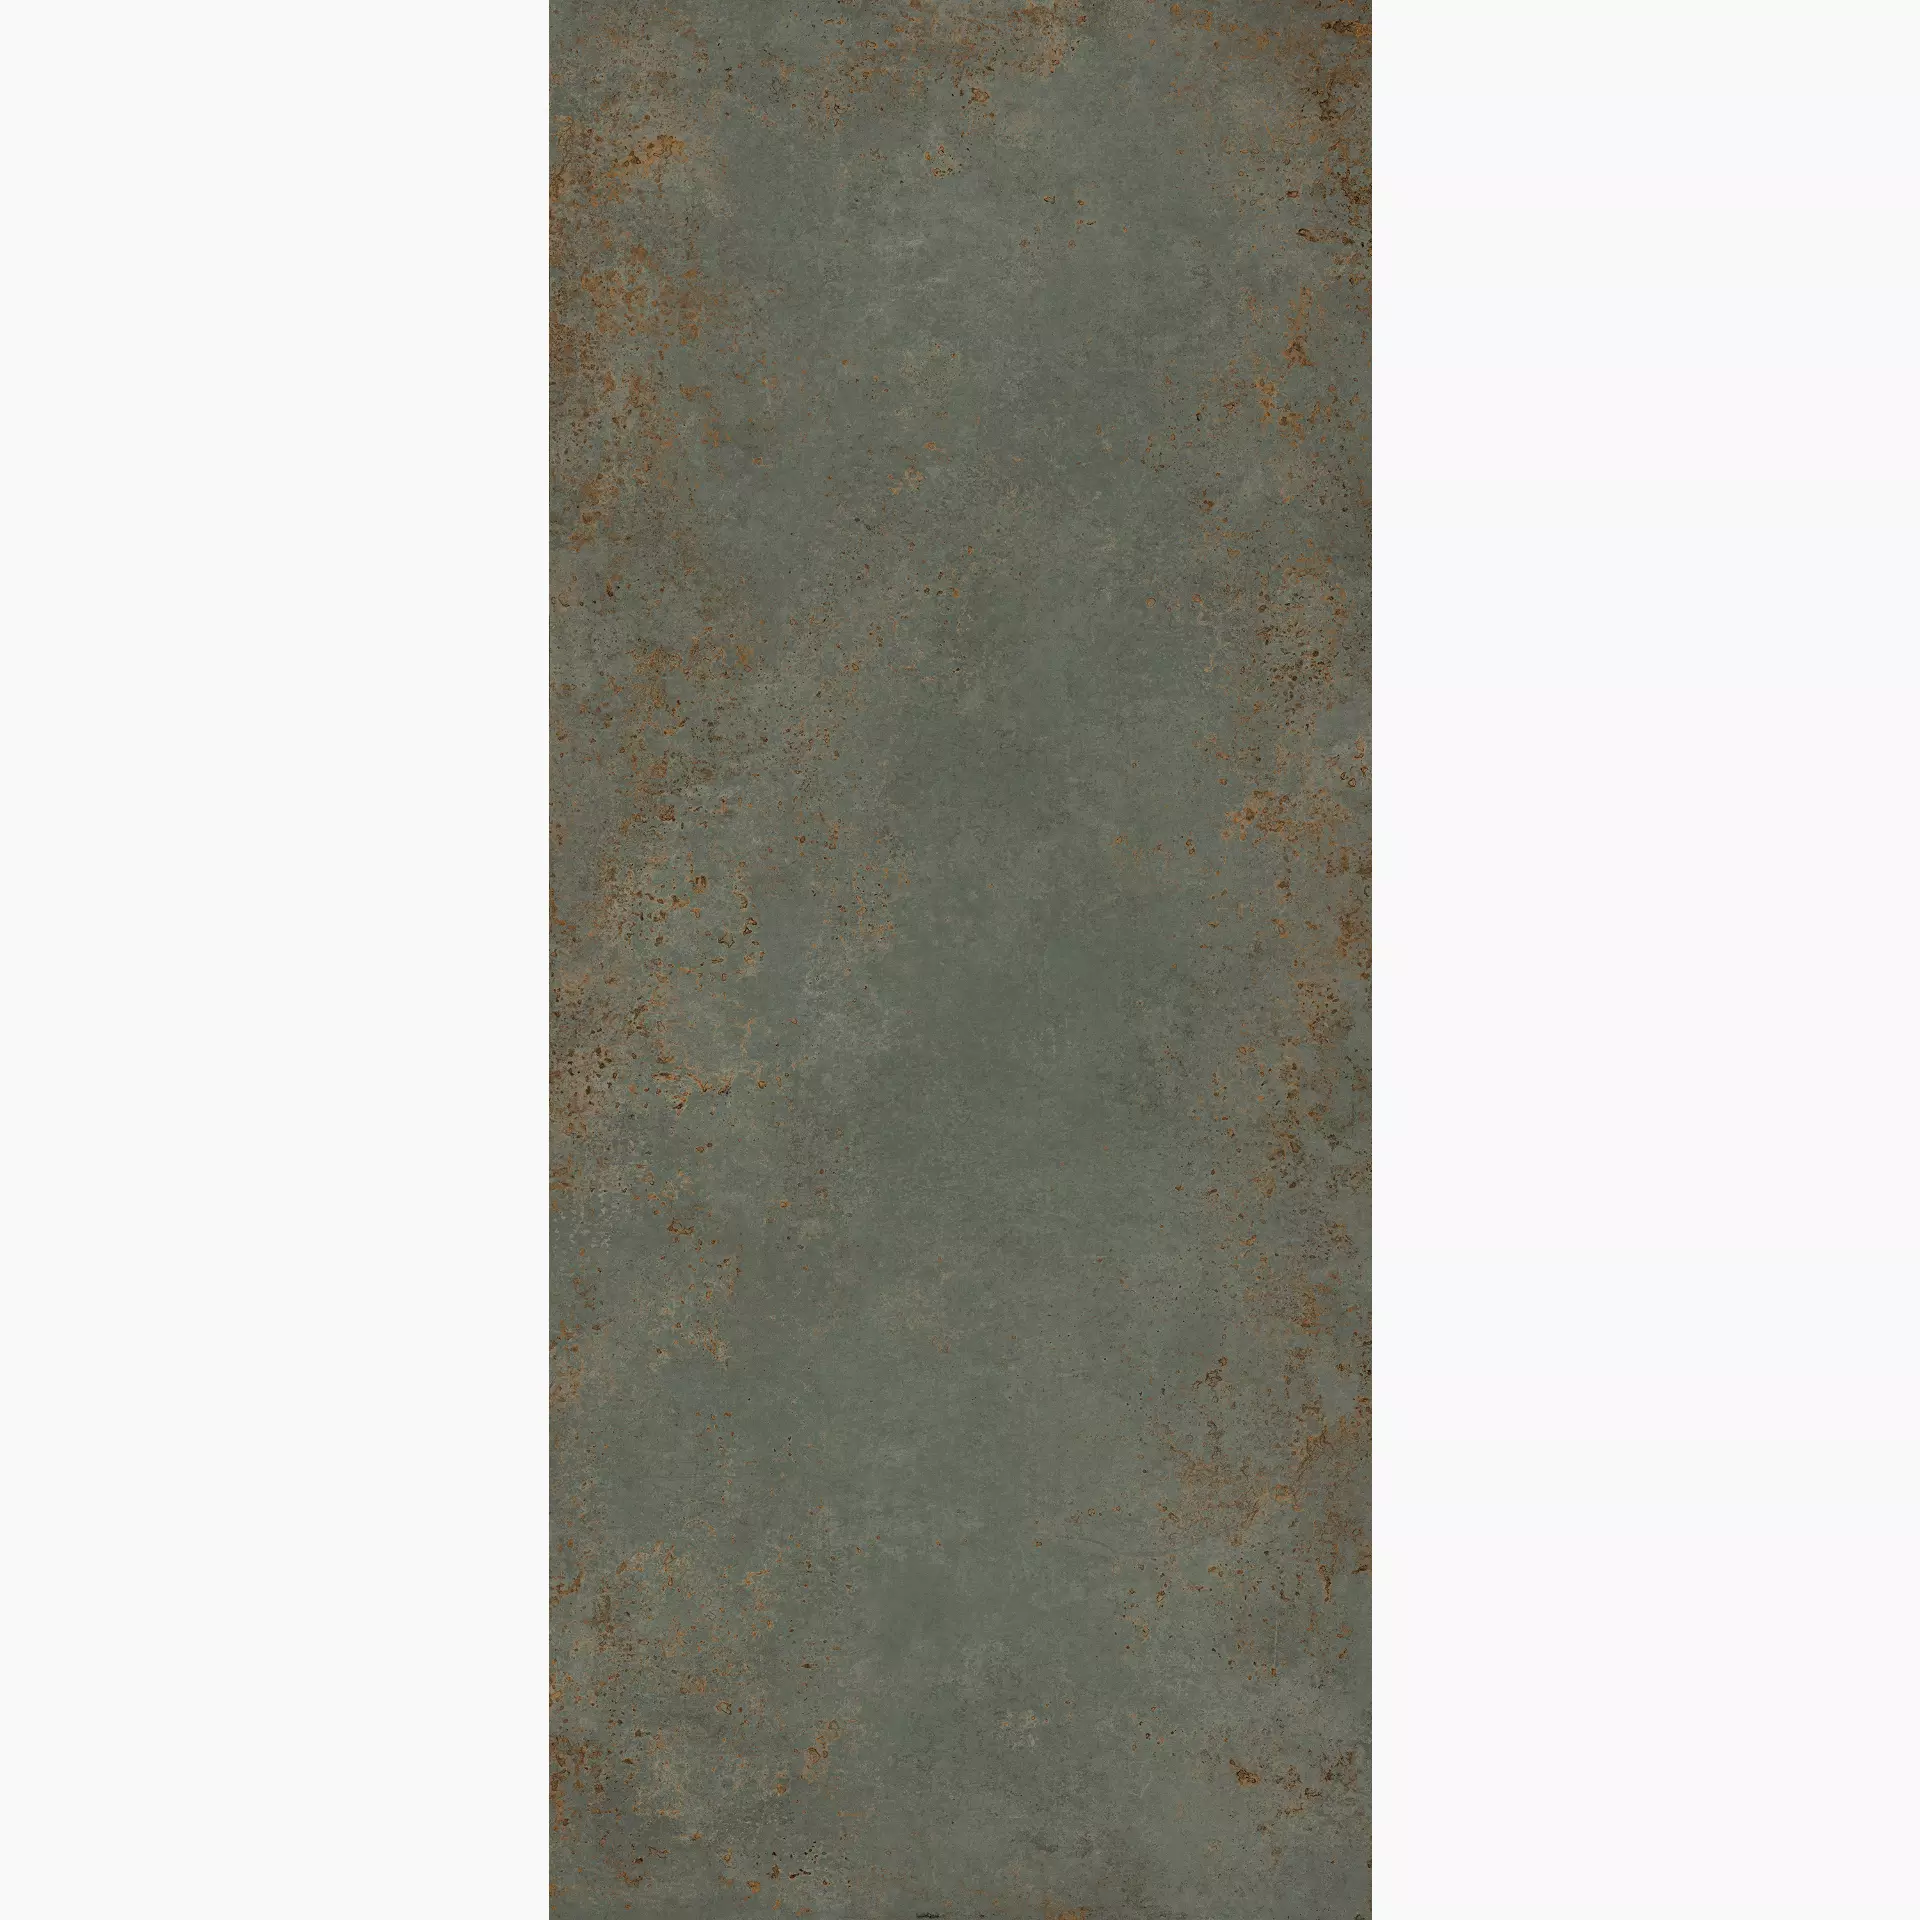 Tagina Metal Oxide Naturale 124041 120x280cm rectified 6,5mm